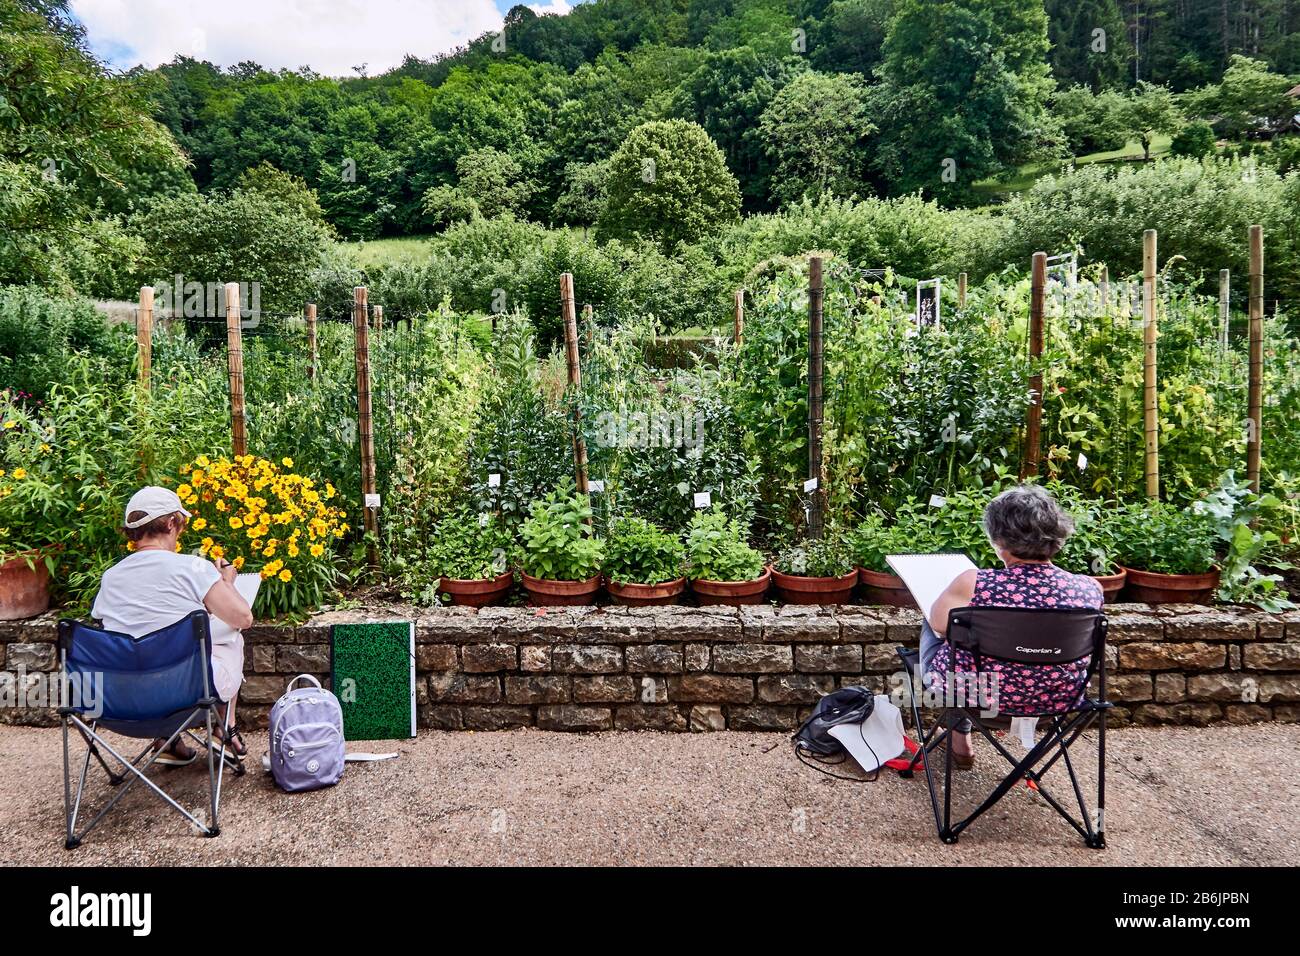 France Ain Departement Auvergne Rhone Alpes Region Drawing Lessons In The Vegetable Garden Conservatory Of The Village Of Cuisat Stock Photo Alamy